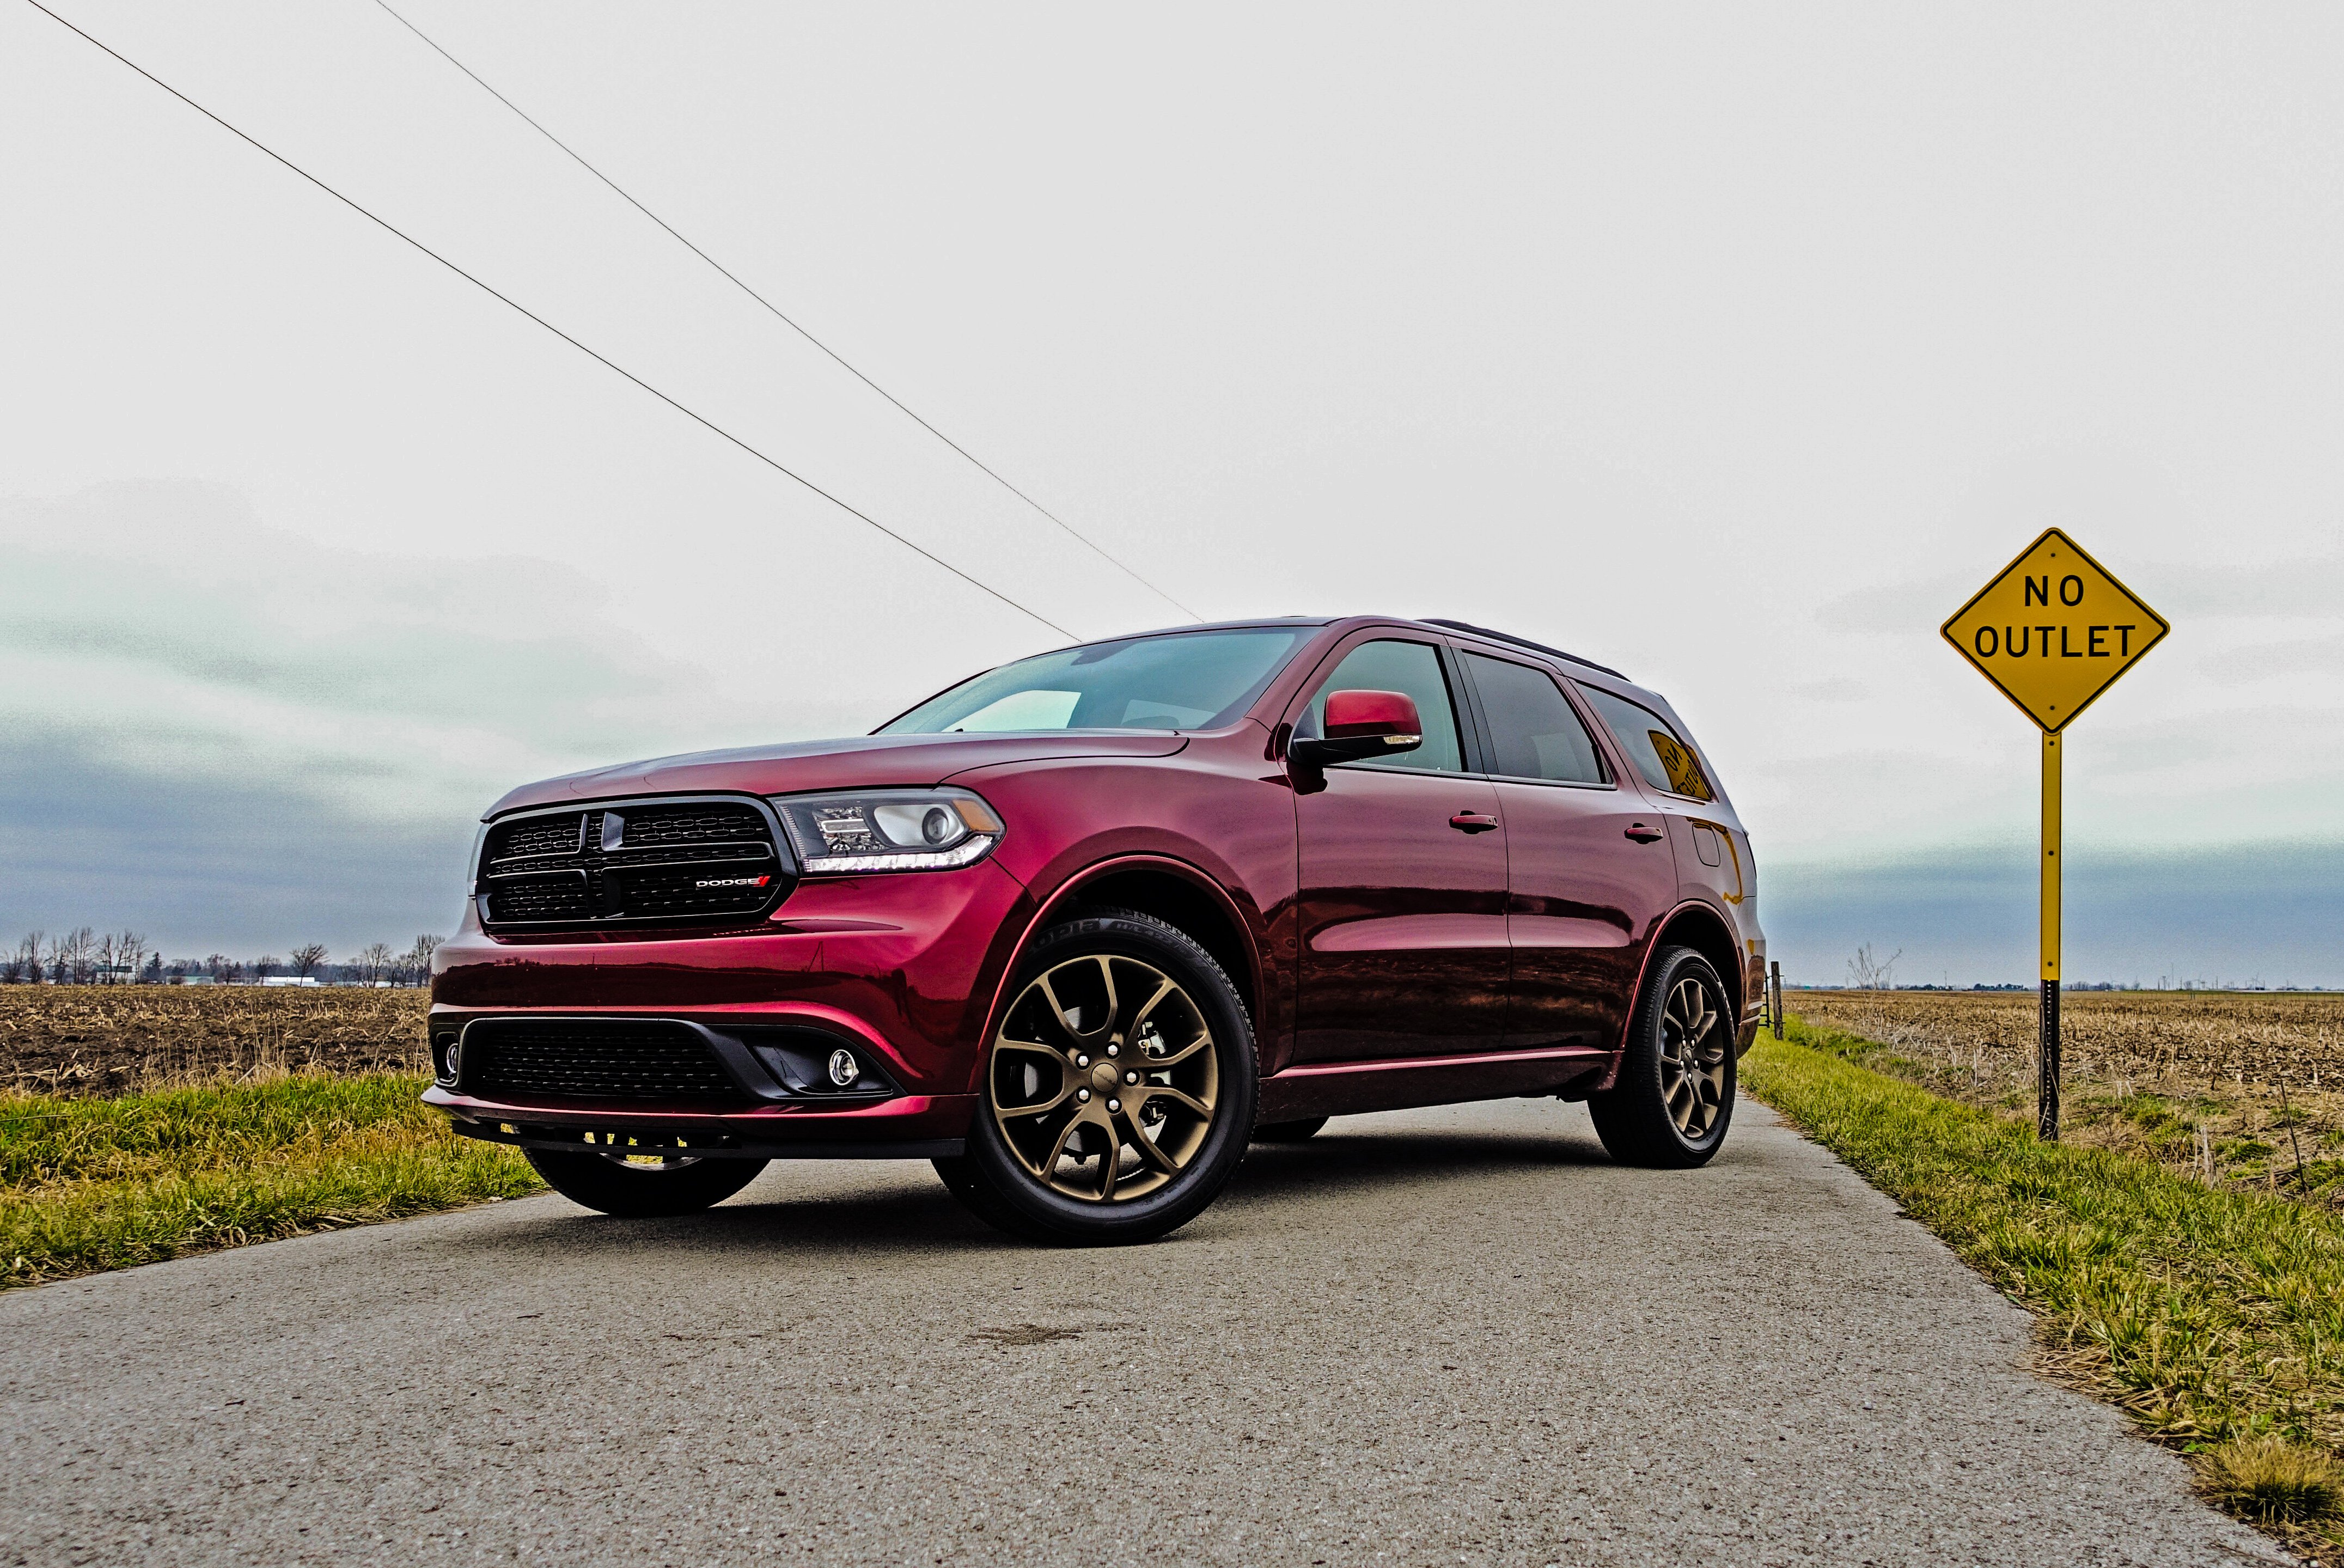 What you need to know about the 2017 Dodge Durango.